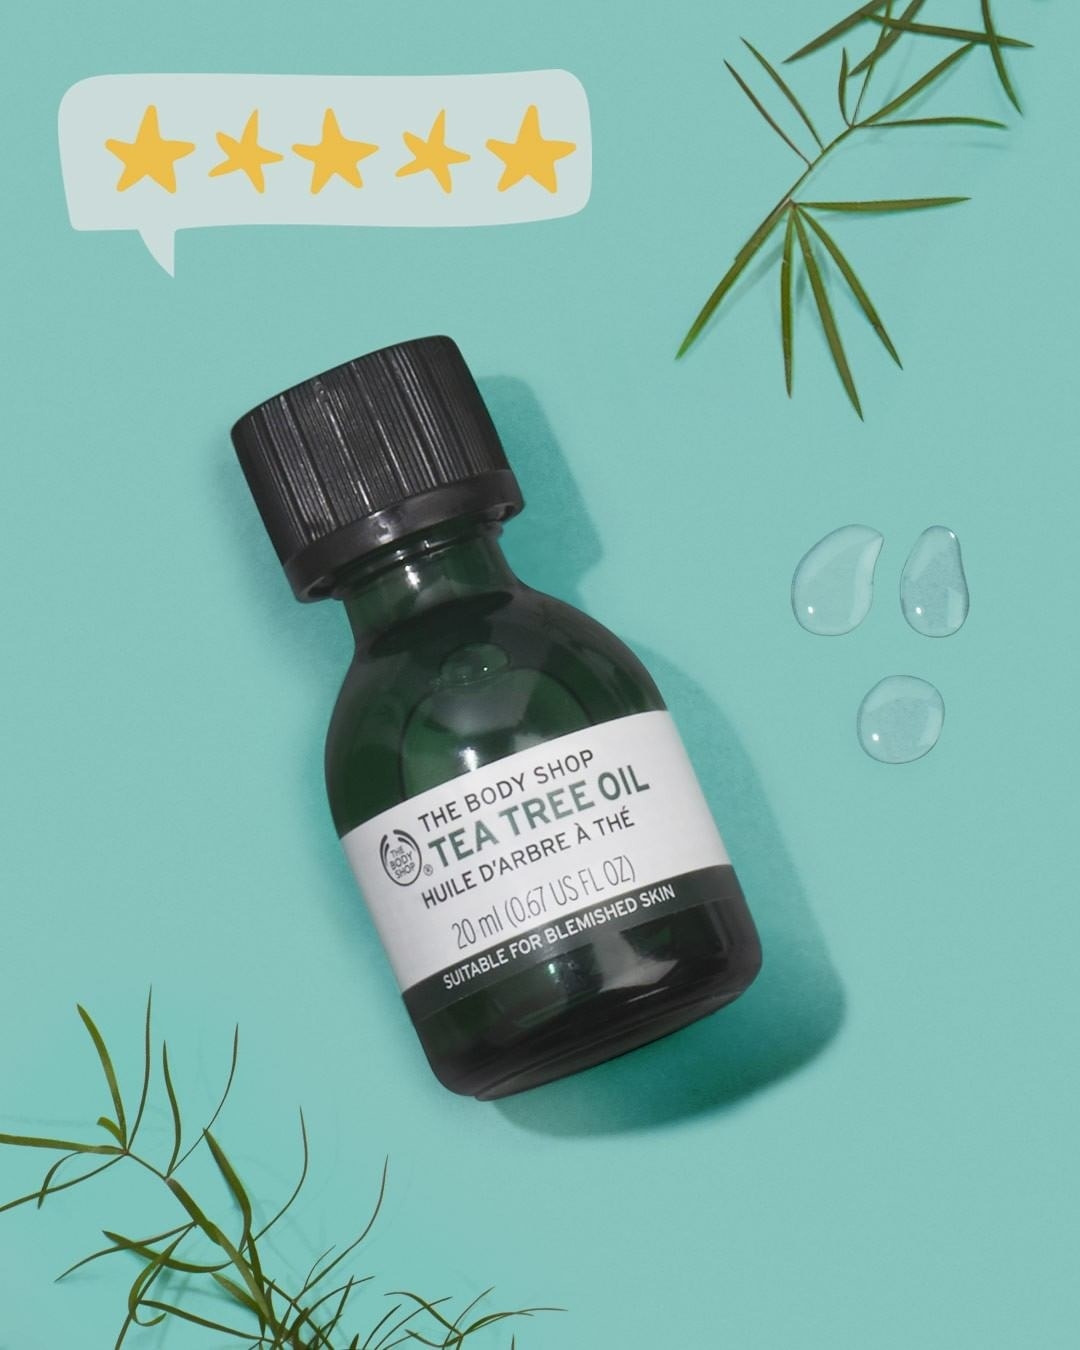 The tea tree oil with a speech bubble filled with stars